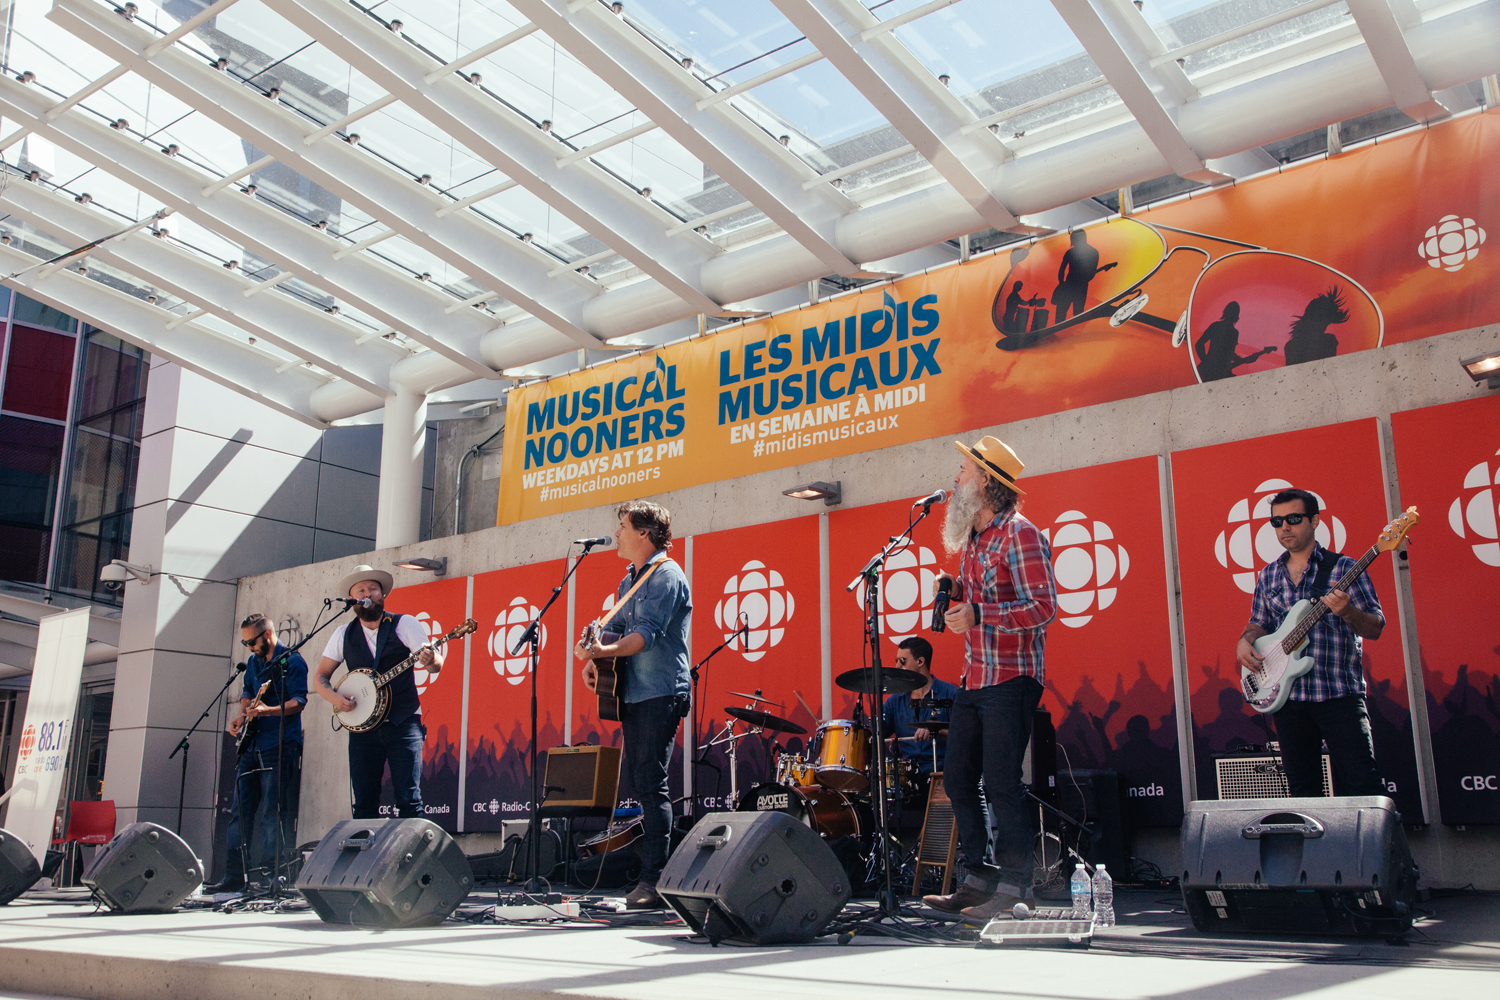  Washboard Union @ CBC Vancouver Photo by Christine McAvoy 